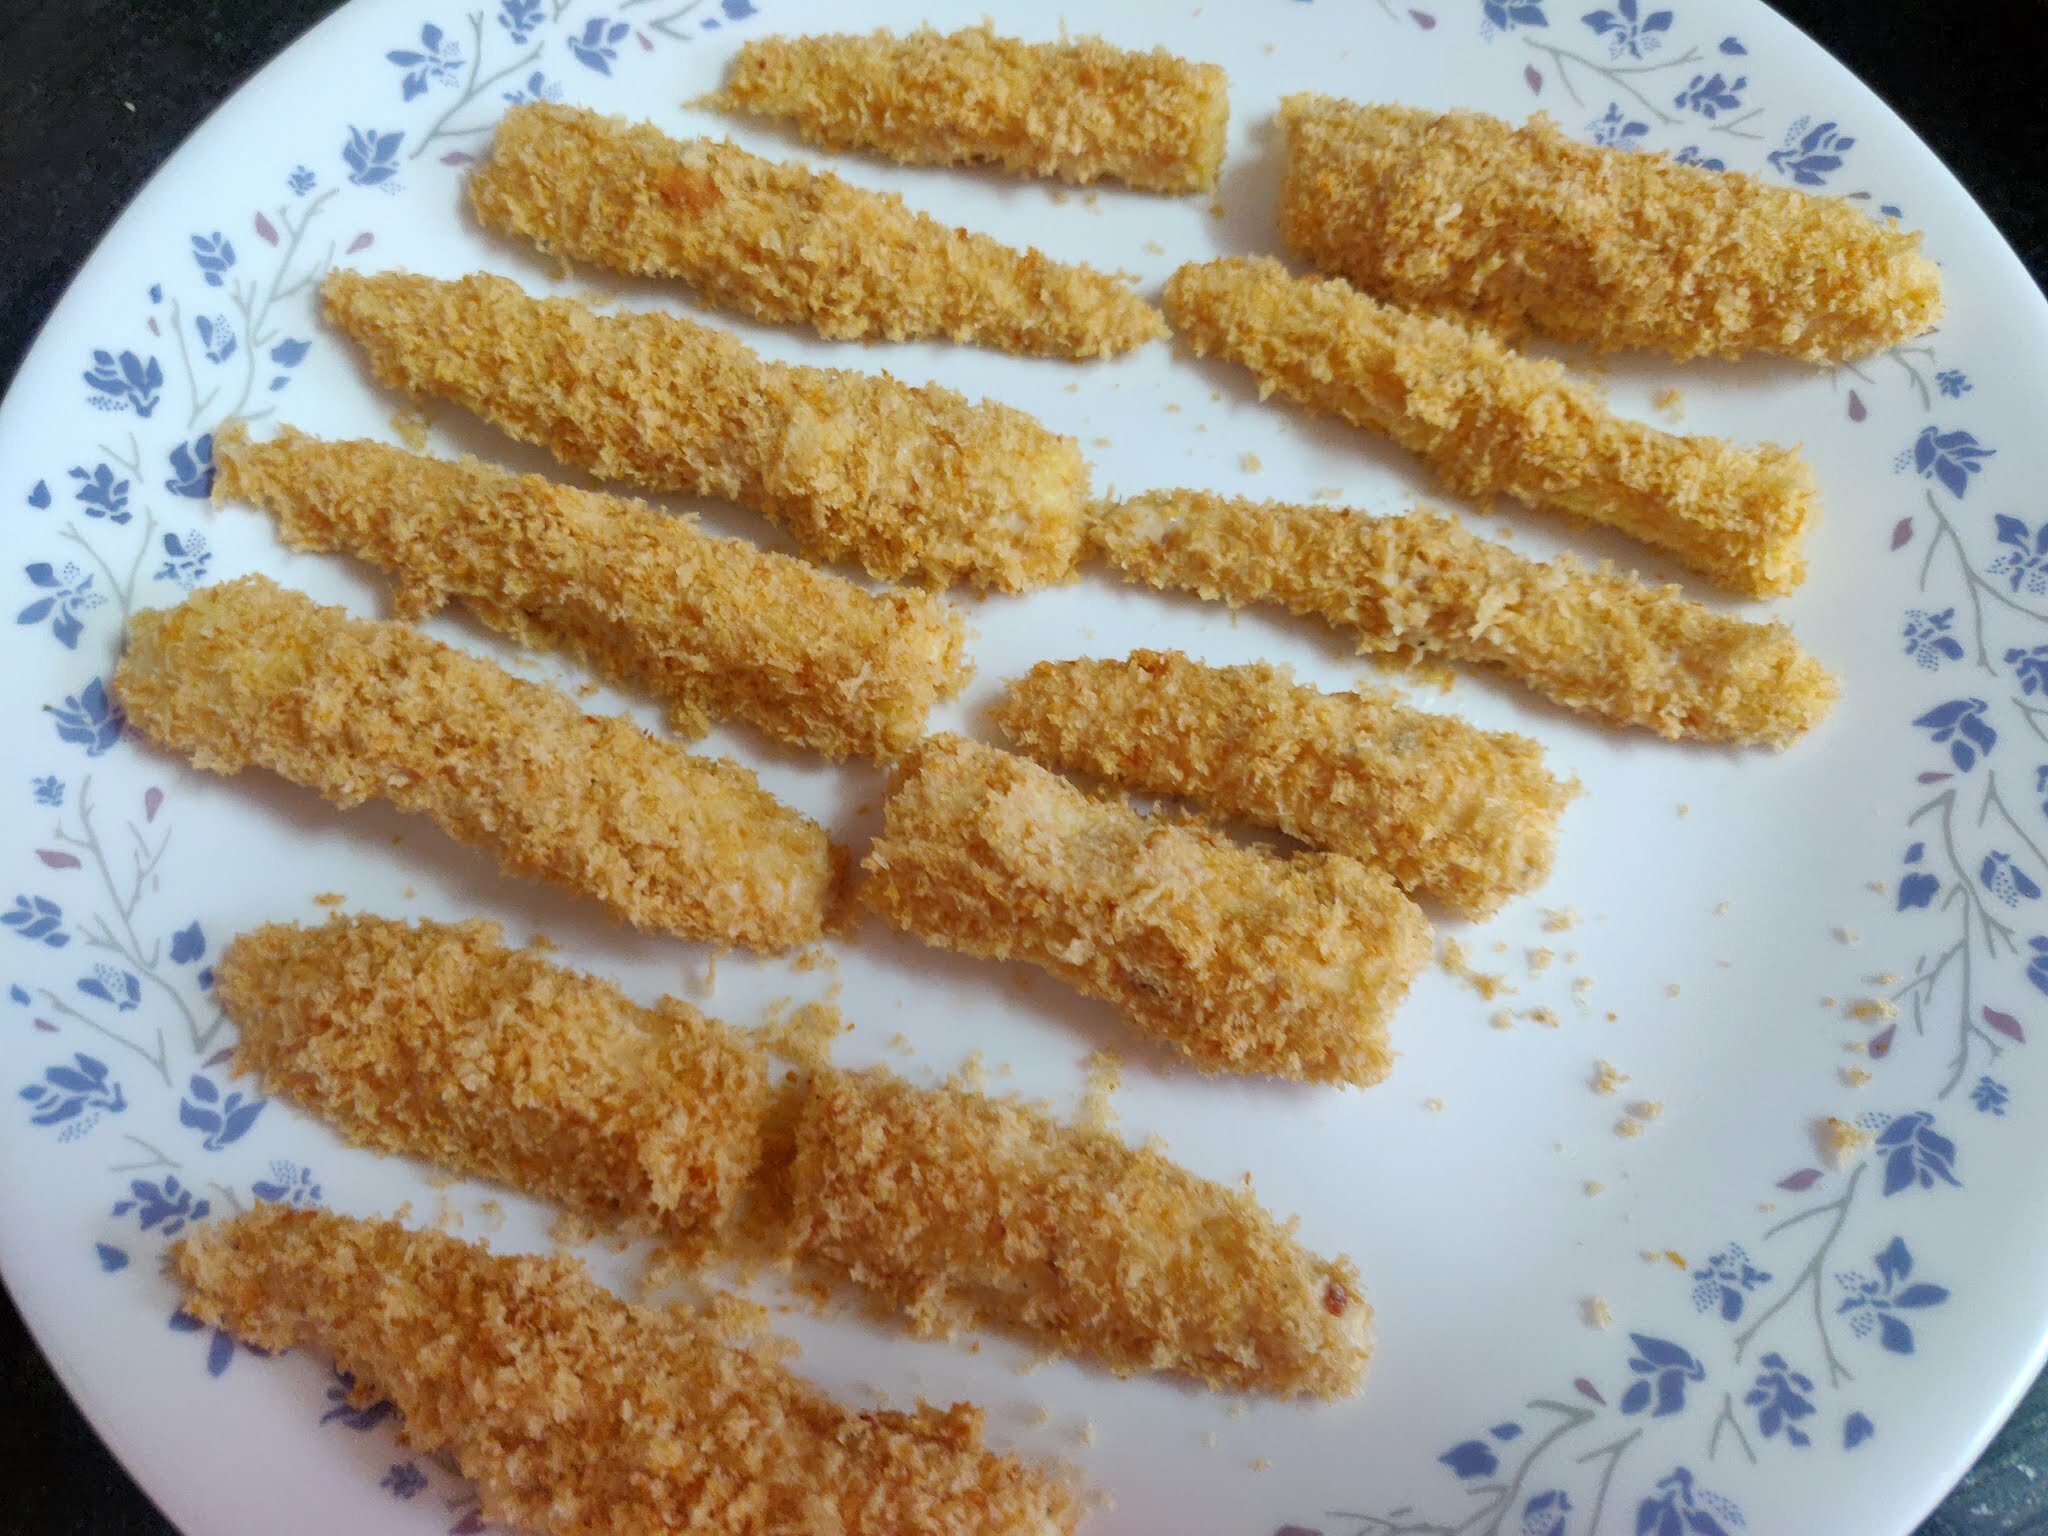 Breaded baby corns on a plate before air frying.